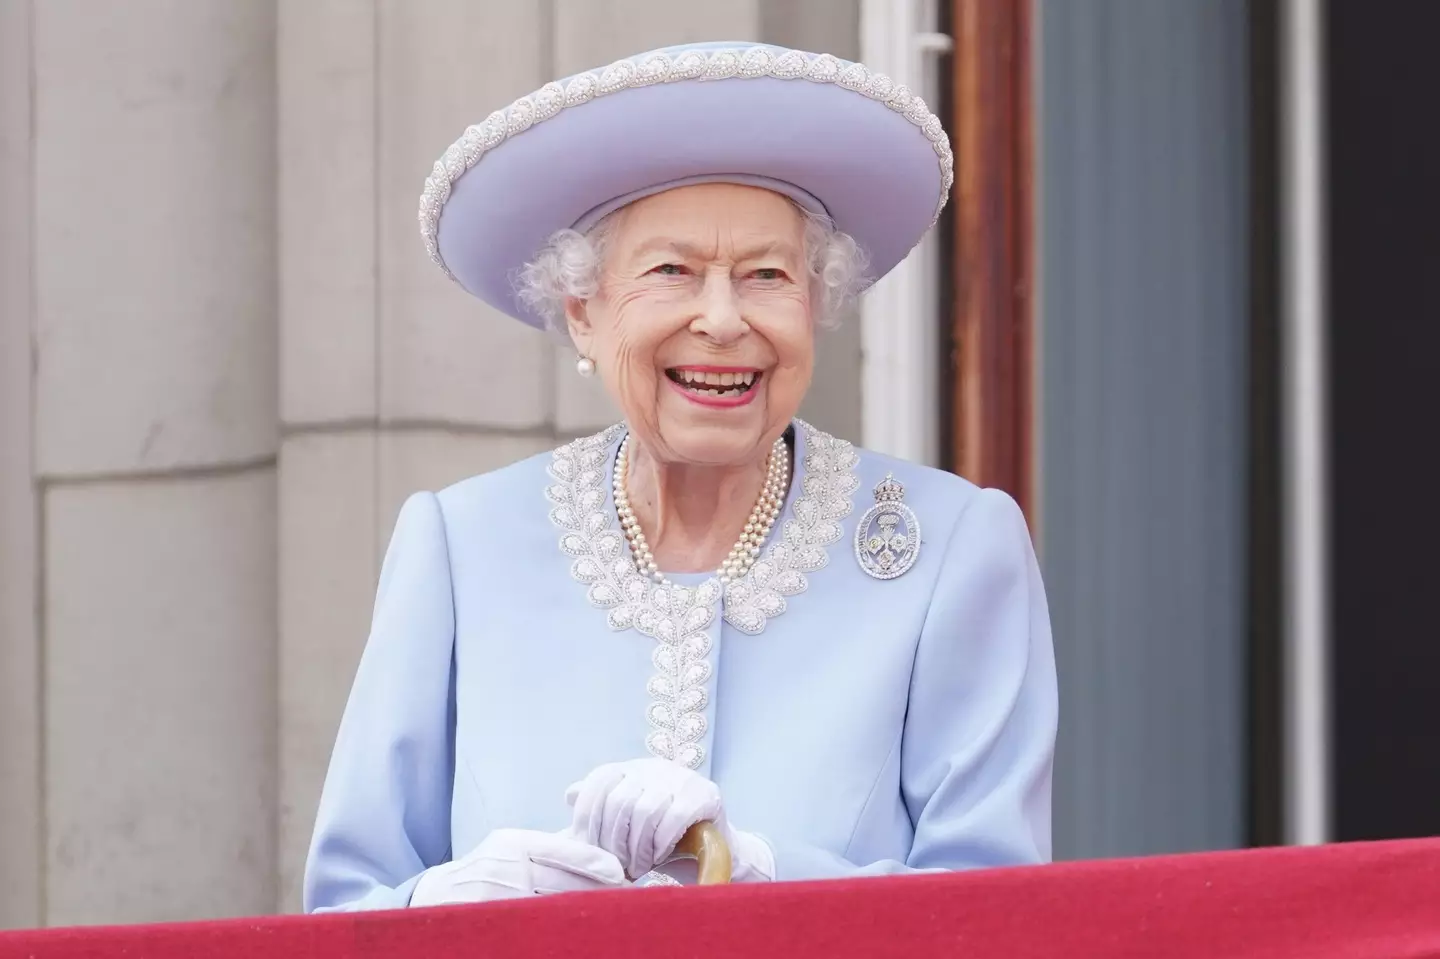 The Queen watching the Trooping the Colour.